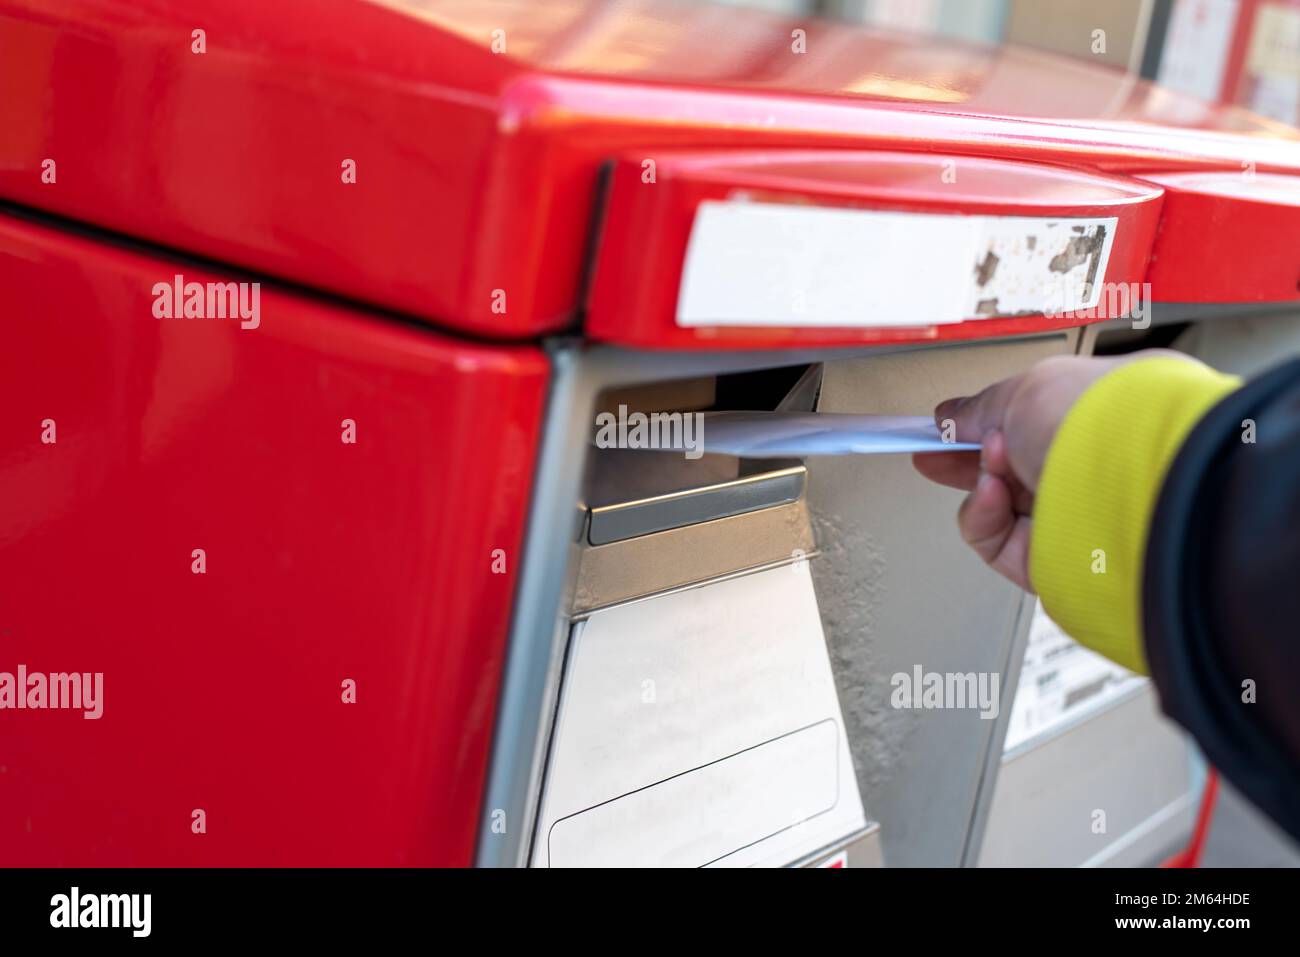 A hand dropping an envelope into a red post mail box Stock Photo